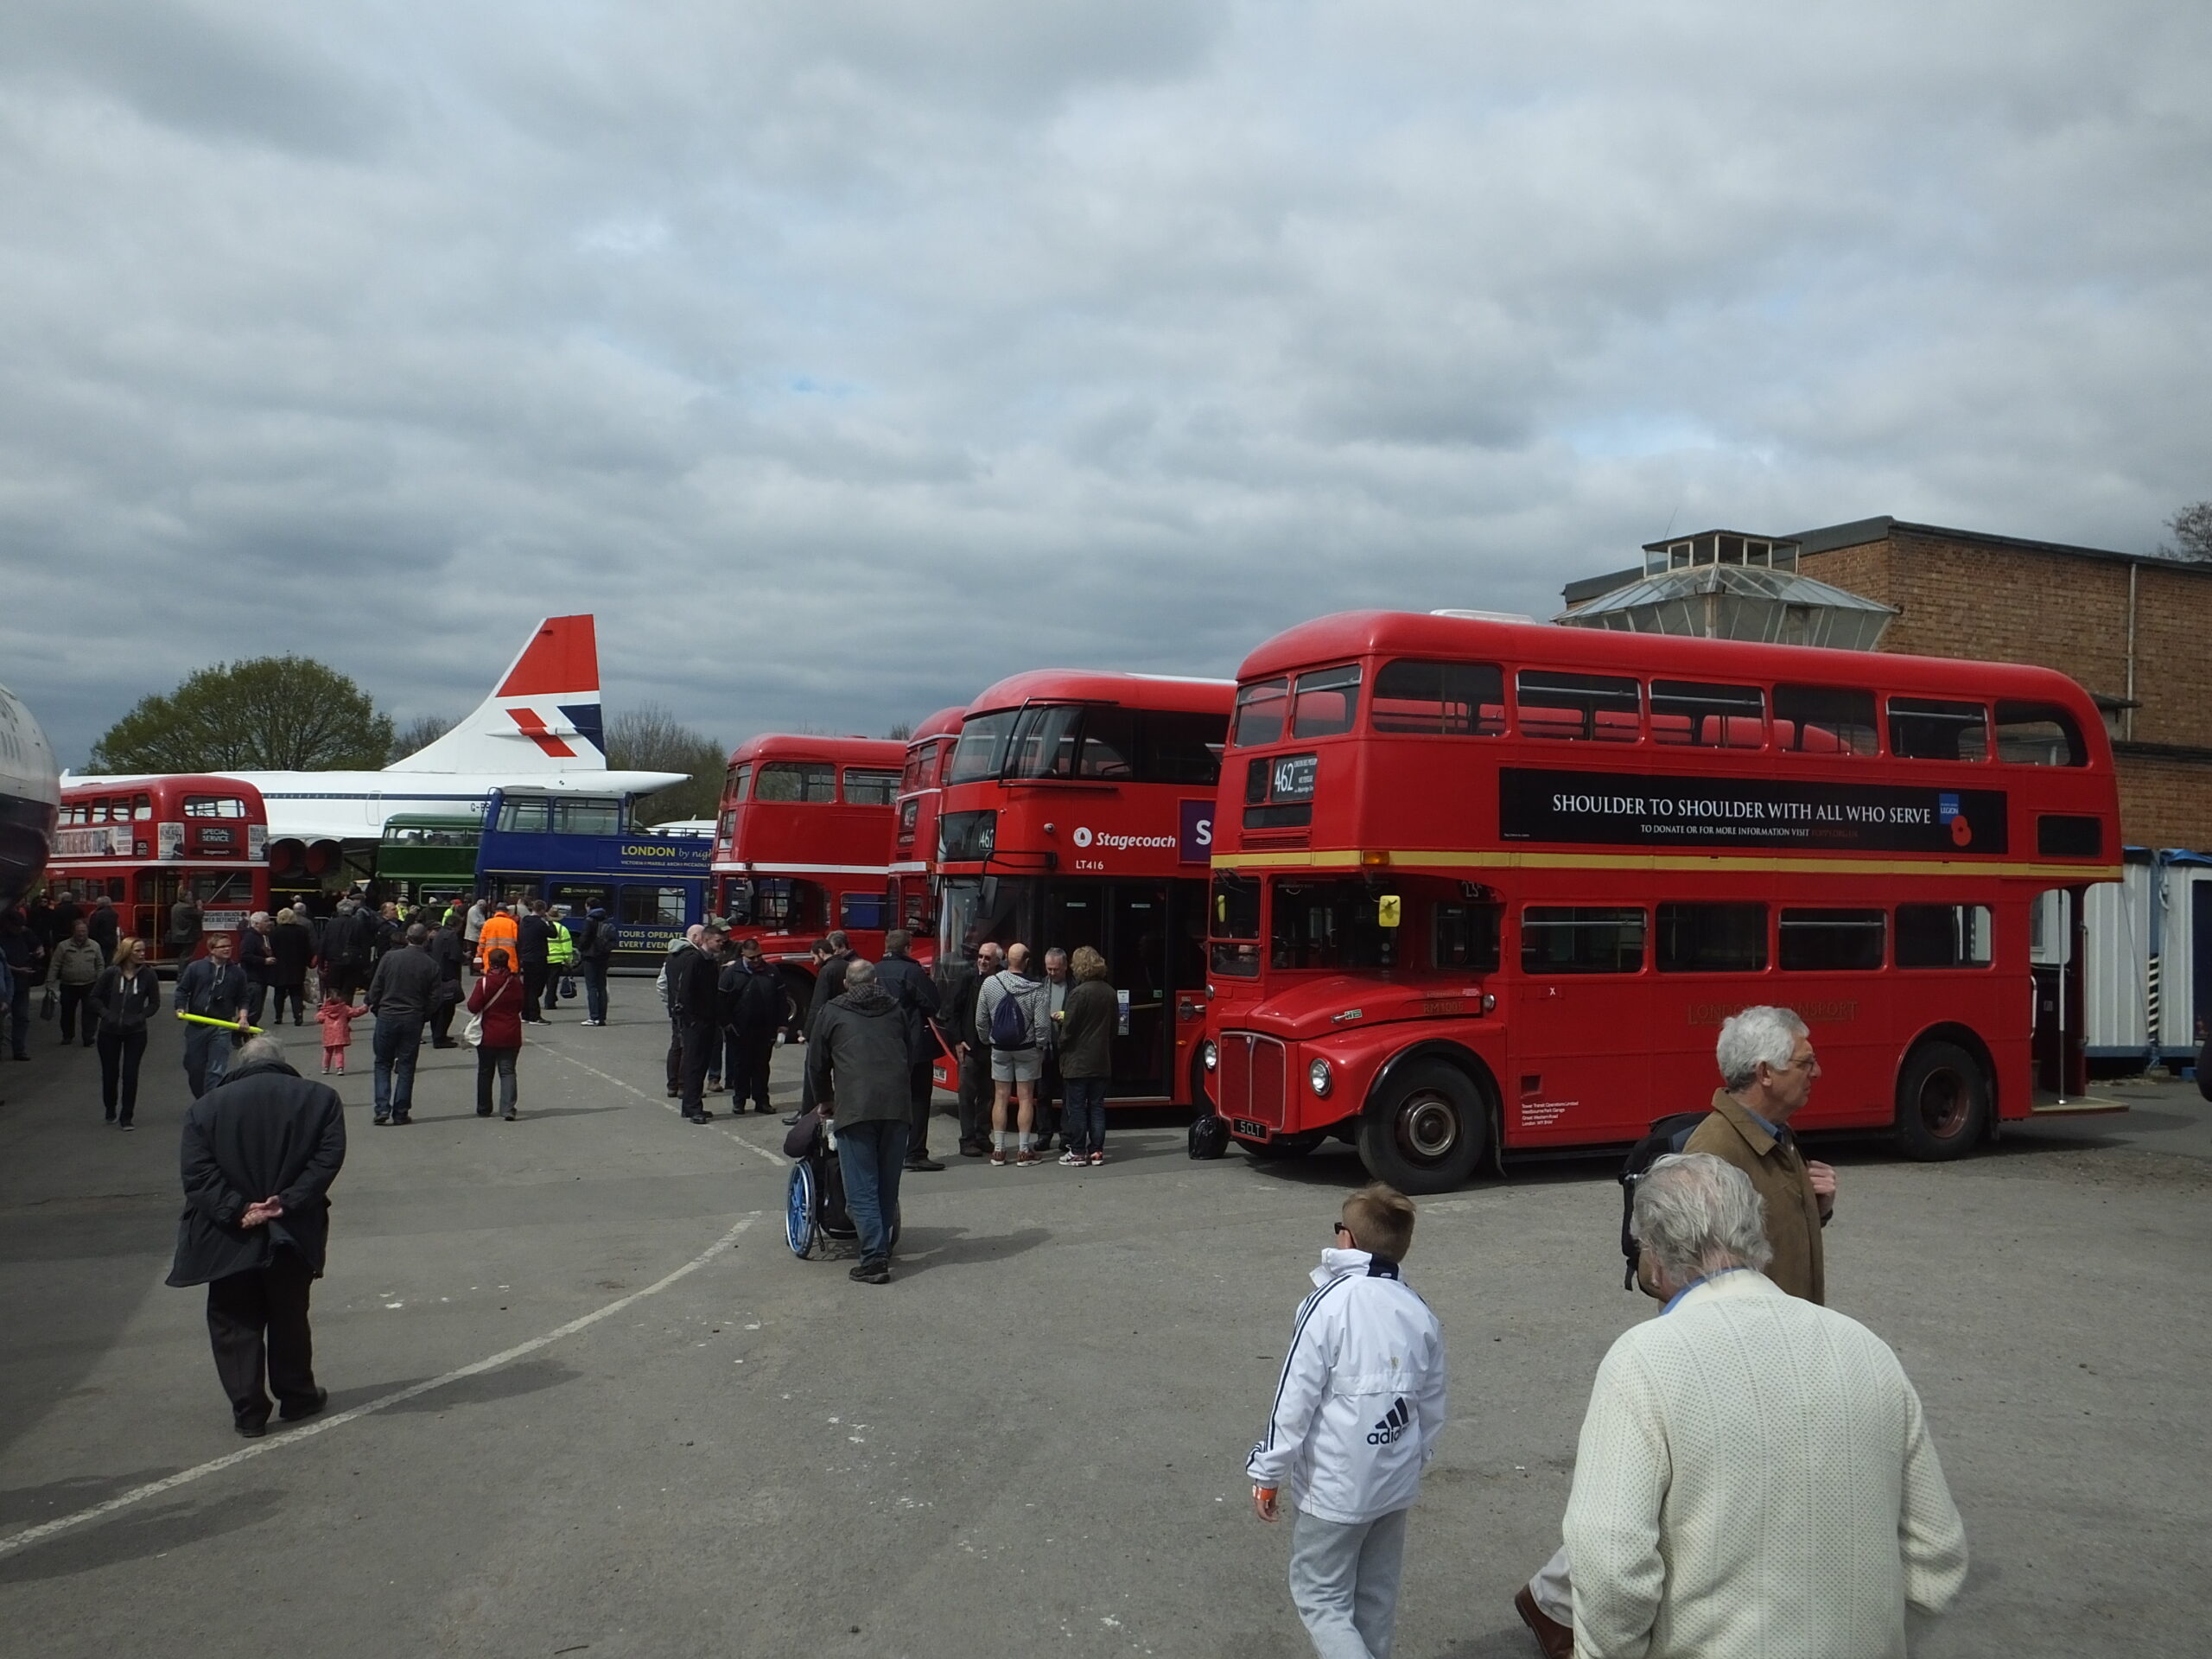 Buses and Concorde